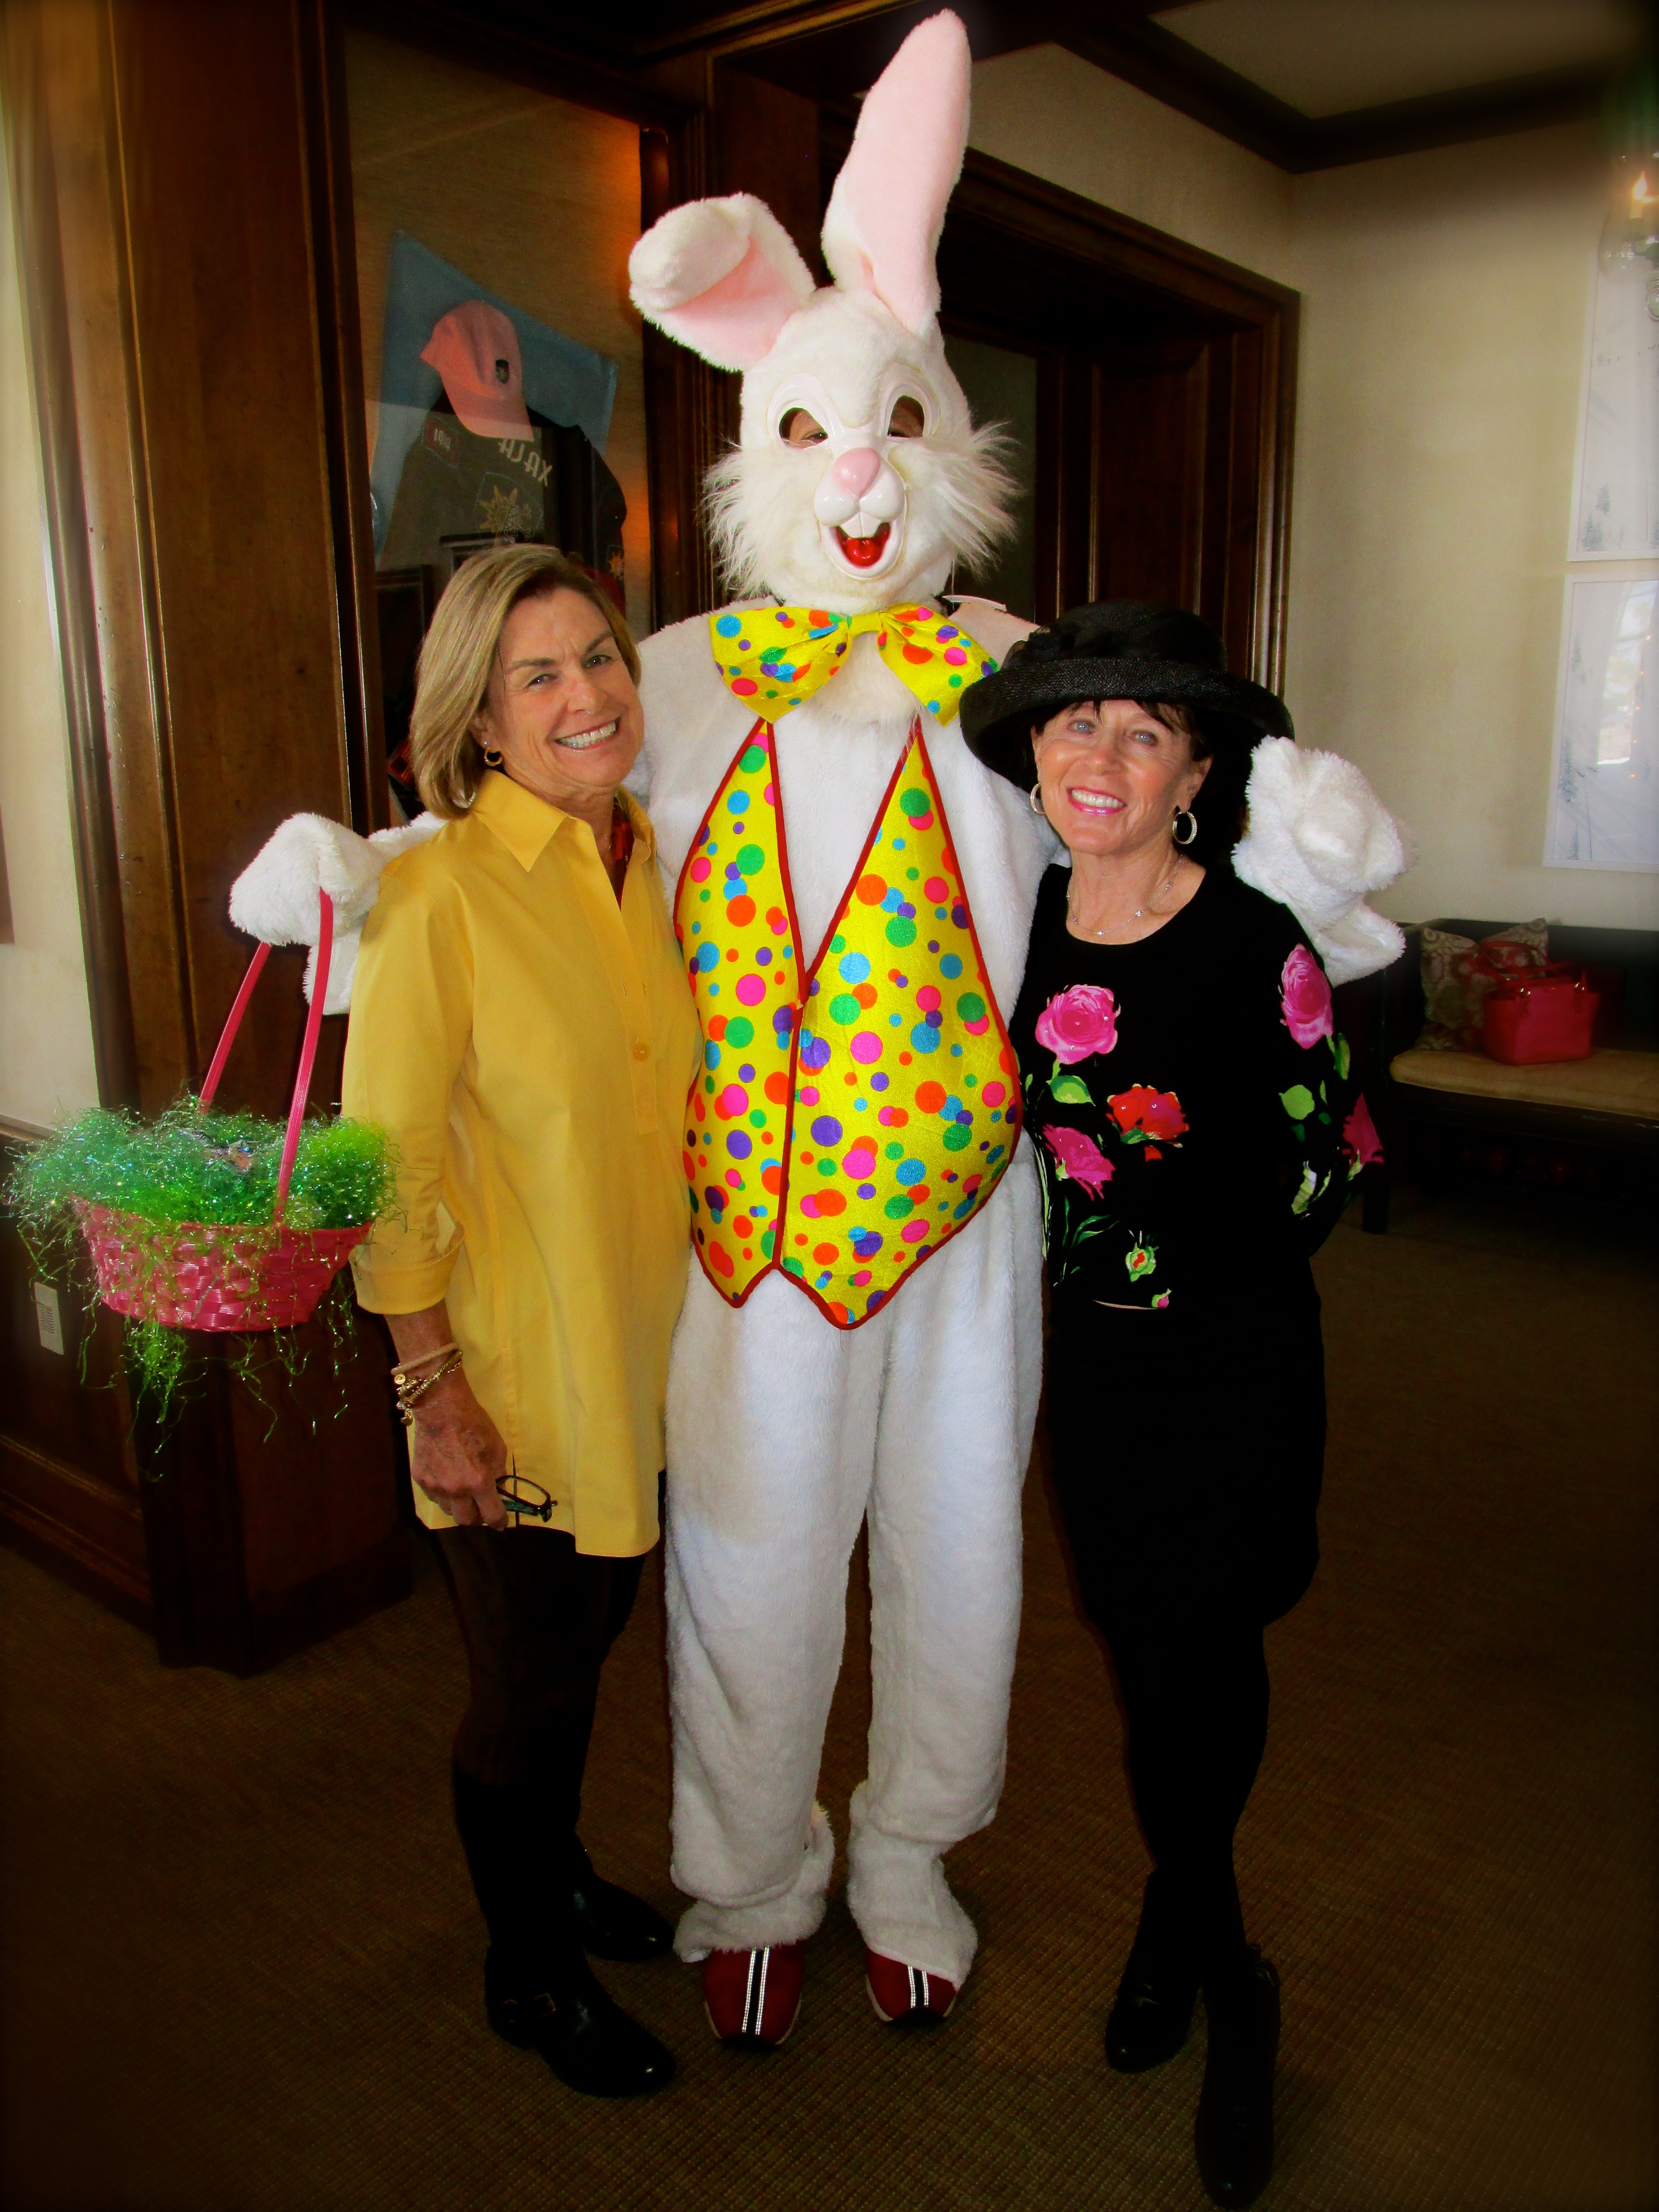 I returned home in time to join my dear friend, Luky, at the Aspen Mountain Club, where she is the Membership Director, for a delicious Easter Brunch. 